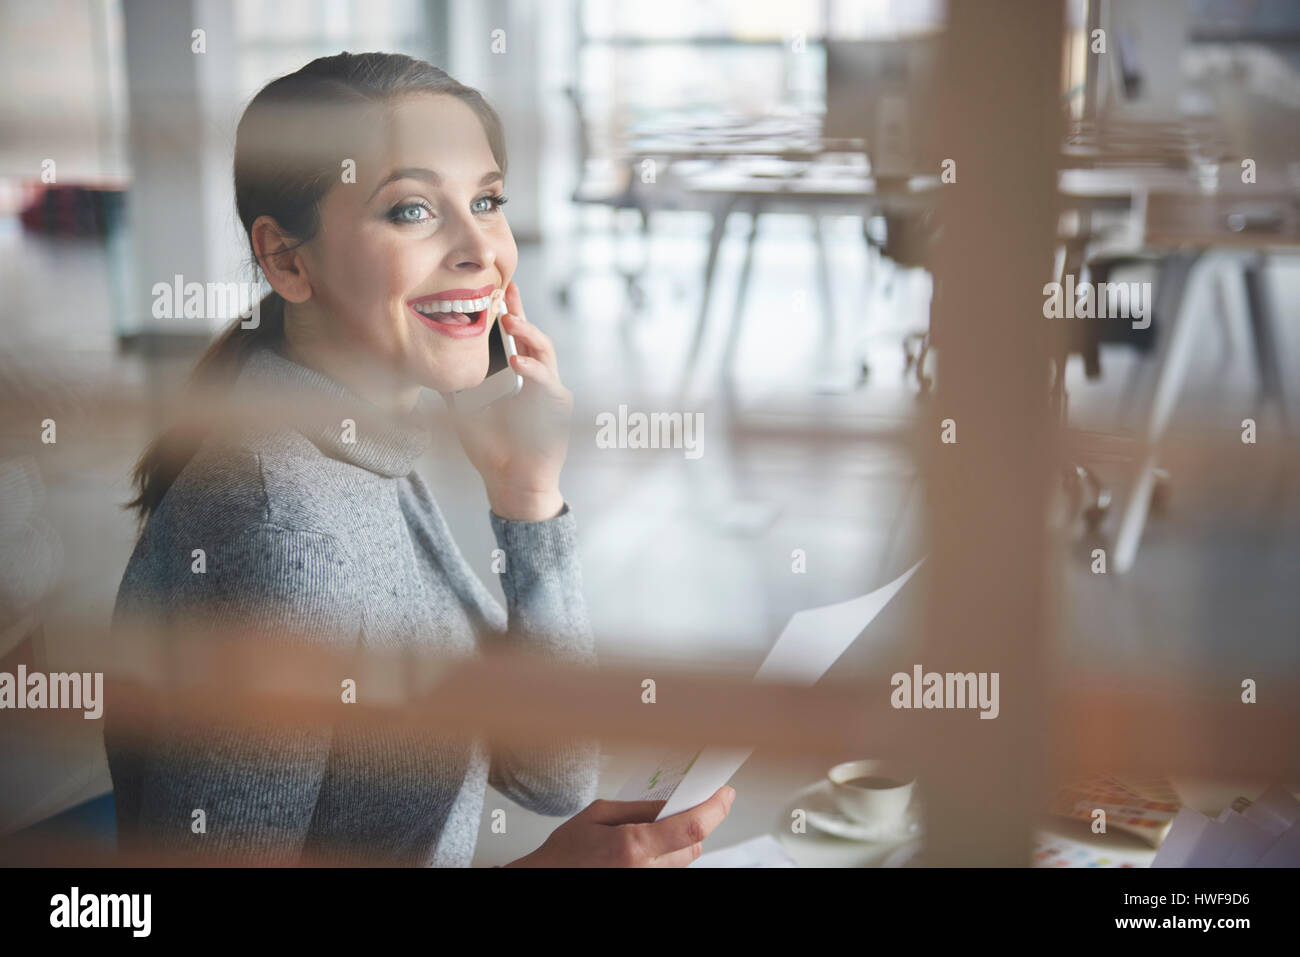 Business woman treats clients fairly Stock Photo